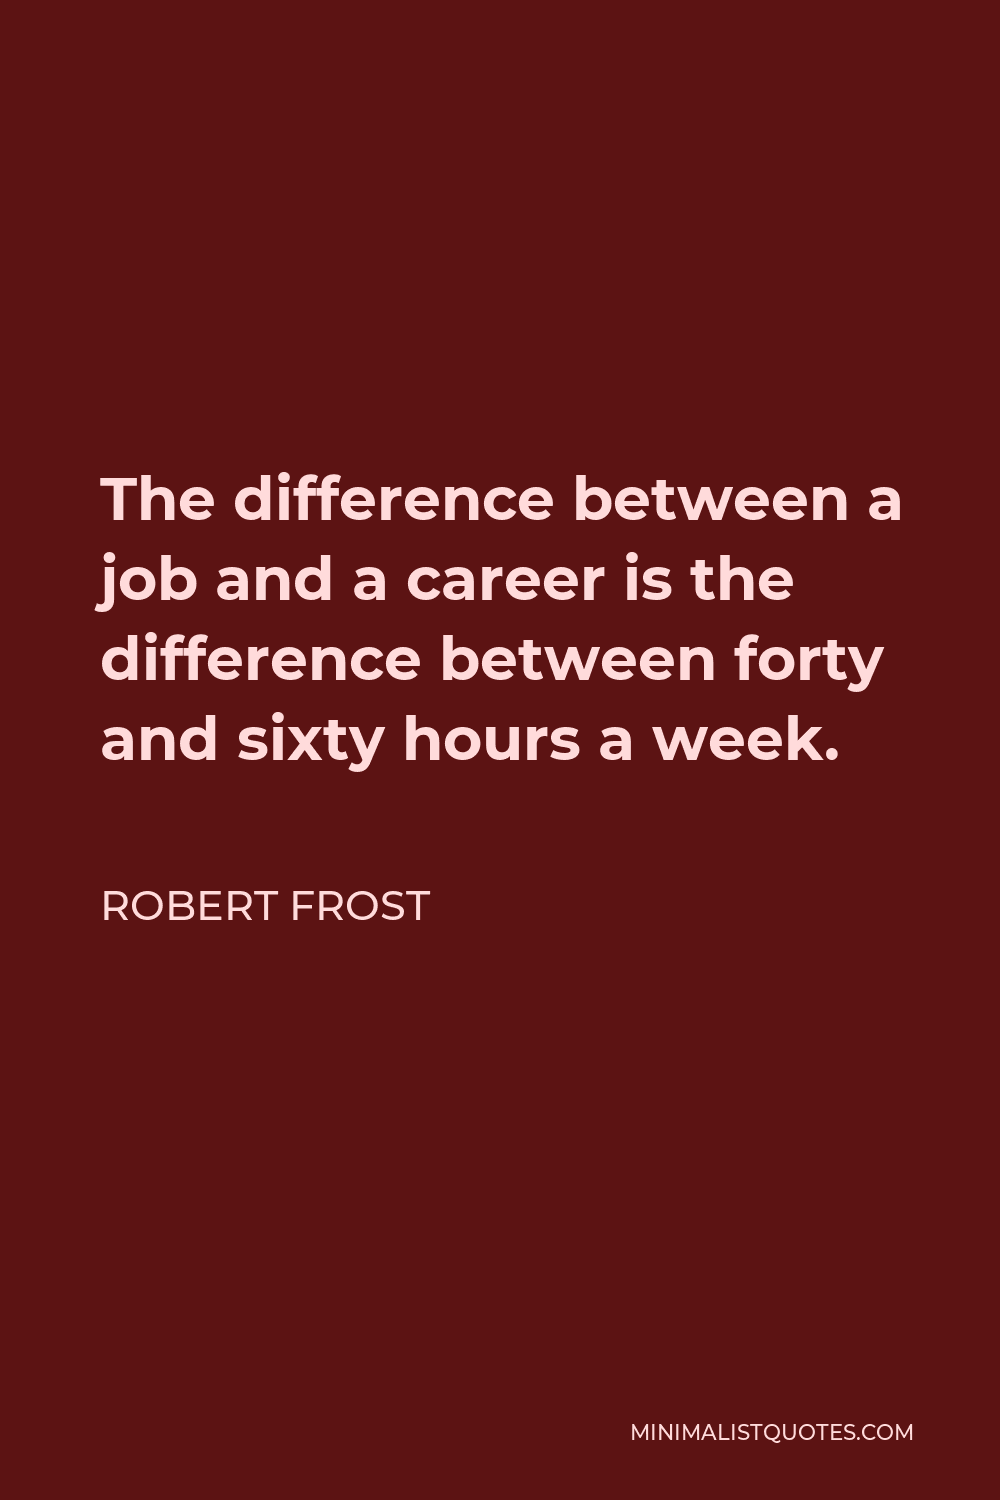 Robert Frost Quote - The difference between a job and a career is the difference between forty and sixty hours a week.